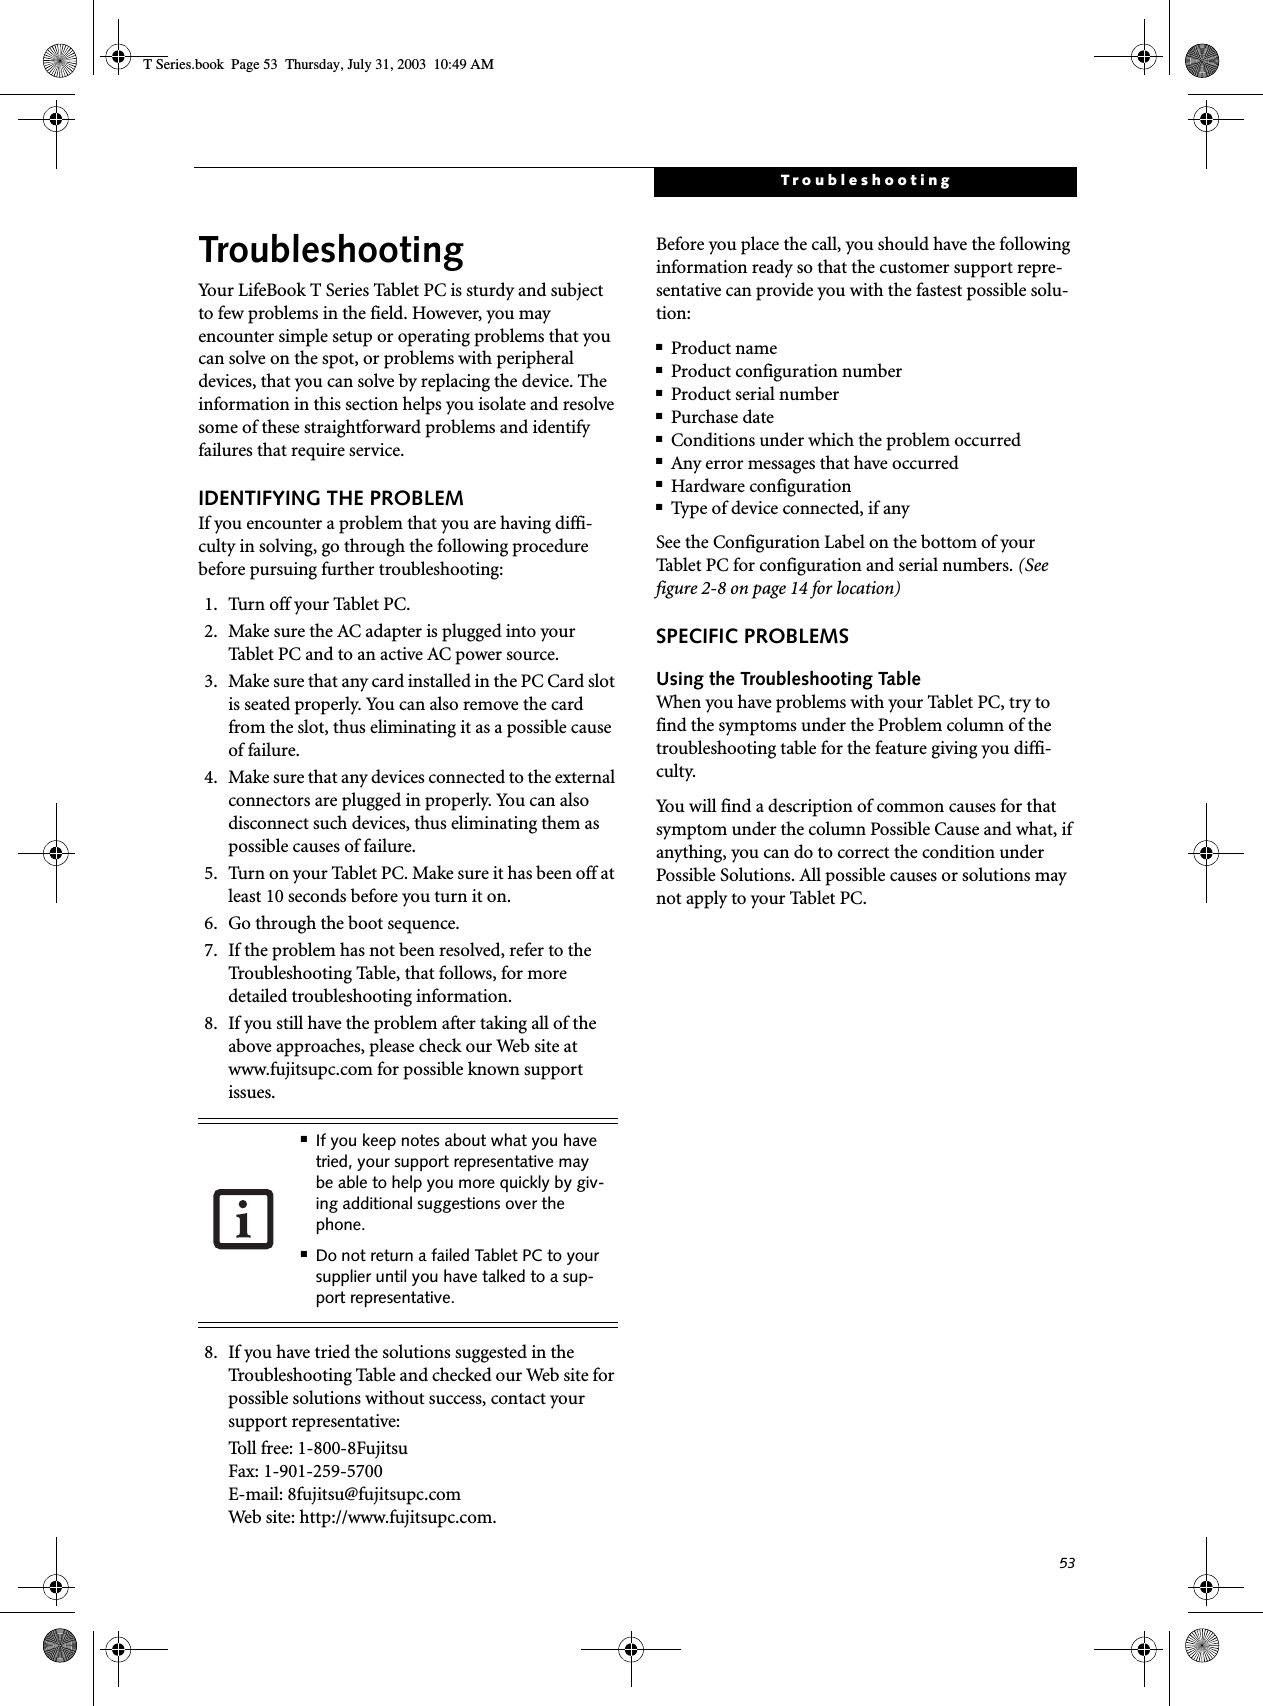 53TroubleshootingTroubleshootingYour LifeBook T Series Tablet PC is sturdy and subject to few problems in the field. However, you may encounter simple setup or operating problems that you can solve on the spot, or problems with peripheral devices, that you can solve by replacing the device. The information in this section helps you isolate and resolve some of these straightforward problems and identify failures that require service.IDENTIFYING THE PROBLEMIf you encounter a problem that you are having diffi-culty in solving, go through the following procedure before pursuing further troubleshooting:1. Tur n off your Table t  P C.2. Make sure the AC adapter is plugged into your Tablet PC and to an active AC power source.3. Make sure that any card installed in the PC Card slot is seated properly. You can also remove the card from the slot, thus eliminating it as a possible cause of failure.4. Make sure that any devices connected to the external connectors are plugged in properly. You can also disconnect such devices, thus eliminating them as possible causes of failure.5. Turn on your Tablet PC. Make sure it has been off at least 10 seconds before you turn it on.6. Go through the boot sequence.7. If the problem has not been resolved, refer to the Troubleshooting Table, that follows, for more detailed troubleshooting information.8. If you still have the problem after taking all of the above approaches, please check our Web site at www.fujitsupc.com for possible known support issues. 8. If you have tried the solutions suggested in the Troubleshooting Table and checked our Web site for possible solutions without success, contact your support representative: Toll free: 1-800-8Fujitsu Fax: 1-901-259-5700 E-mail: 8fujitsu@fujitsupc.com Web site: http://www.fujitsupc.com.Before you place the call, you should have the following information ready so that the customer support repre-sentative can provide you with the fastest possible solu-tion:■Product name■Product configuration number■Product serial number■Purchase date■Conditions under which the problem occurred■Any error messages that have occurred■Hardware configuration■Type of device connected, if anySee the Configuration Label on the bottom of yourTablet PC for configuration and serial numbers. (See figure 2-8 on page 14 for location)SPECIFIC PROBLEMSUsing the Troubleshooting TableWhen you have problems with your Tablet PC, try to find the symptoms under the Problem column of the troubleshooting table for the feature giving you diffi-culty. You will find a description of common causes for that symptom under the column Possible Cause and what, if anything, you can do to correct the condition under Possible Solutions. All possible causes or solutions may not apply to your Tablet PC.■If you keep notes about what you have tried, your support representative may be able to help you more quickly by giv-ing additional suggestions over the phone.■Do not return a failed Tablet PC to your supplier until you have talked to a sup-port representative.T Series.book  Page 53  Thursday, July 31, 2003  10:49 AM